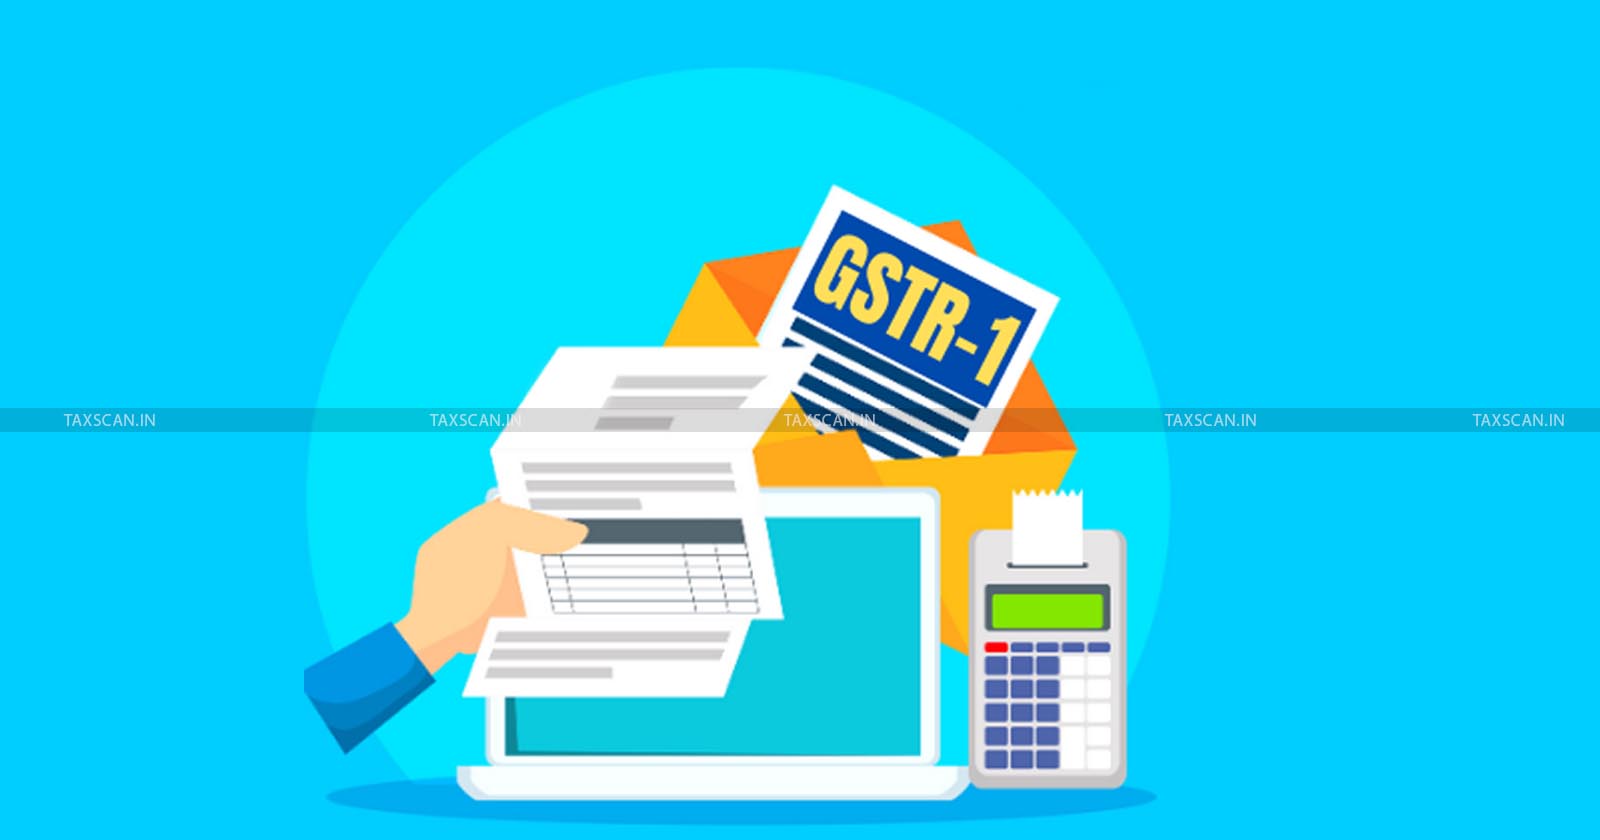 Rejection of ITC - Supplier to file GSTR- 1 -Kerala HC - Assessing Authority-TAXSCAN